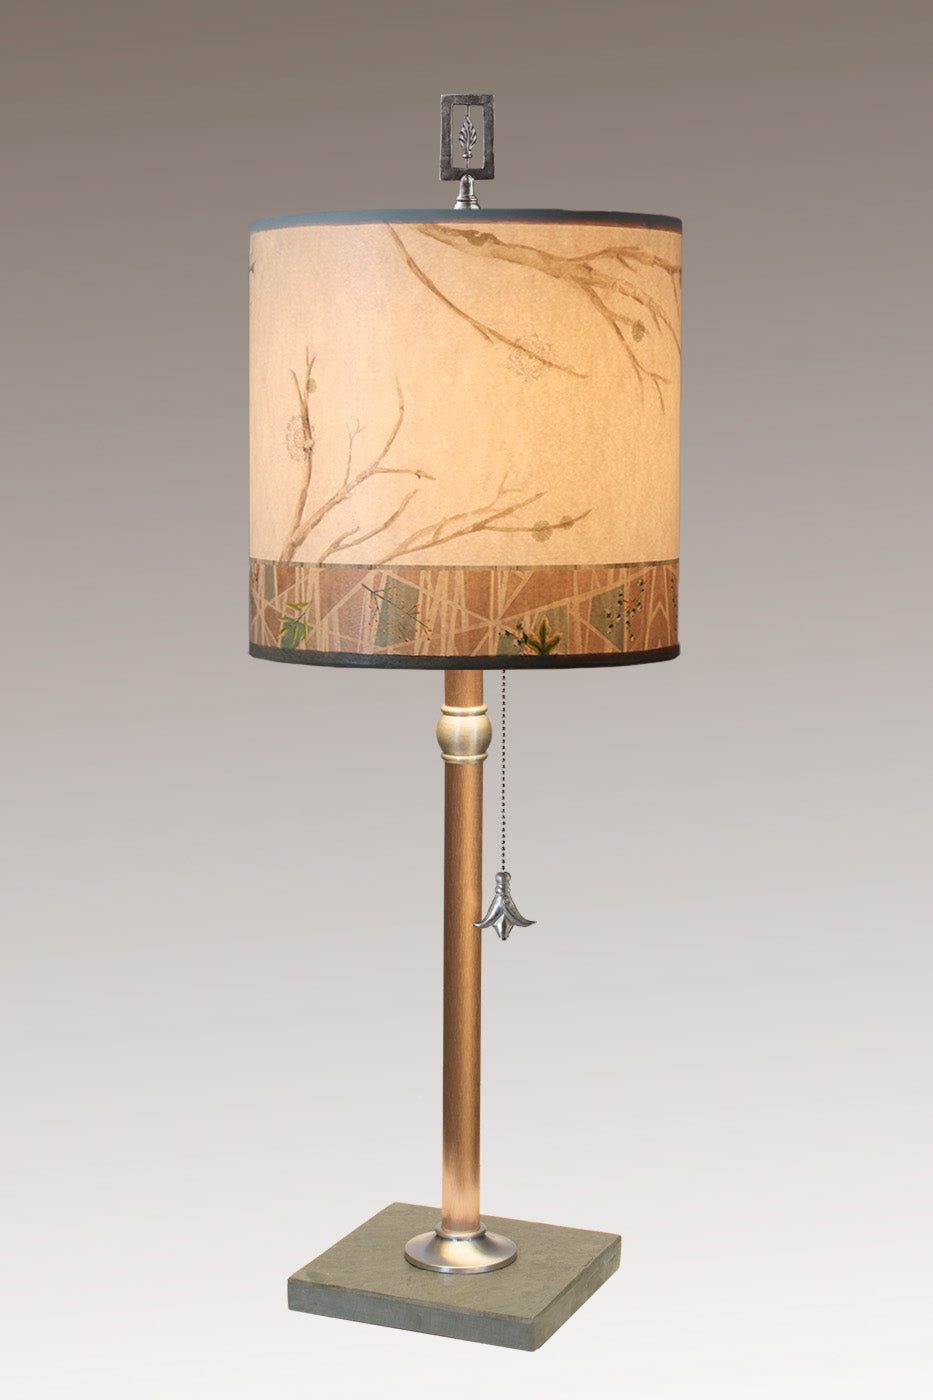 Janna Ugone & Co Table Lamps Copper Table Lamp with Medium Drum Shade in Prism Branch